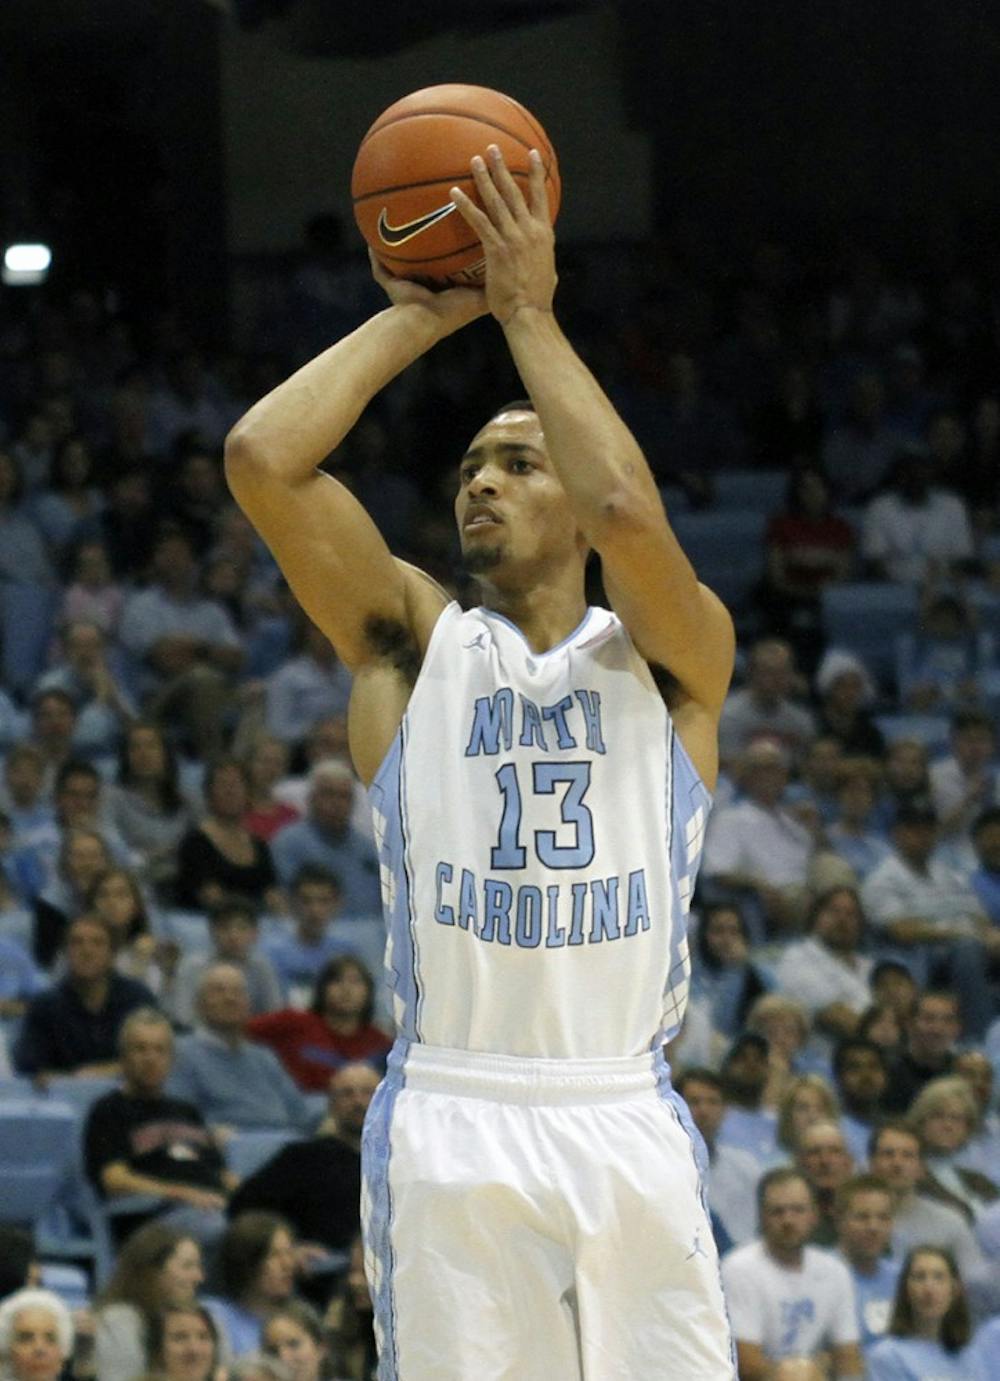 UNC Men's Basketball defeated Davidson on Saturday night in Chapel Hill, NC